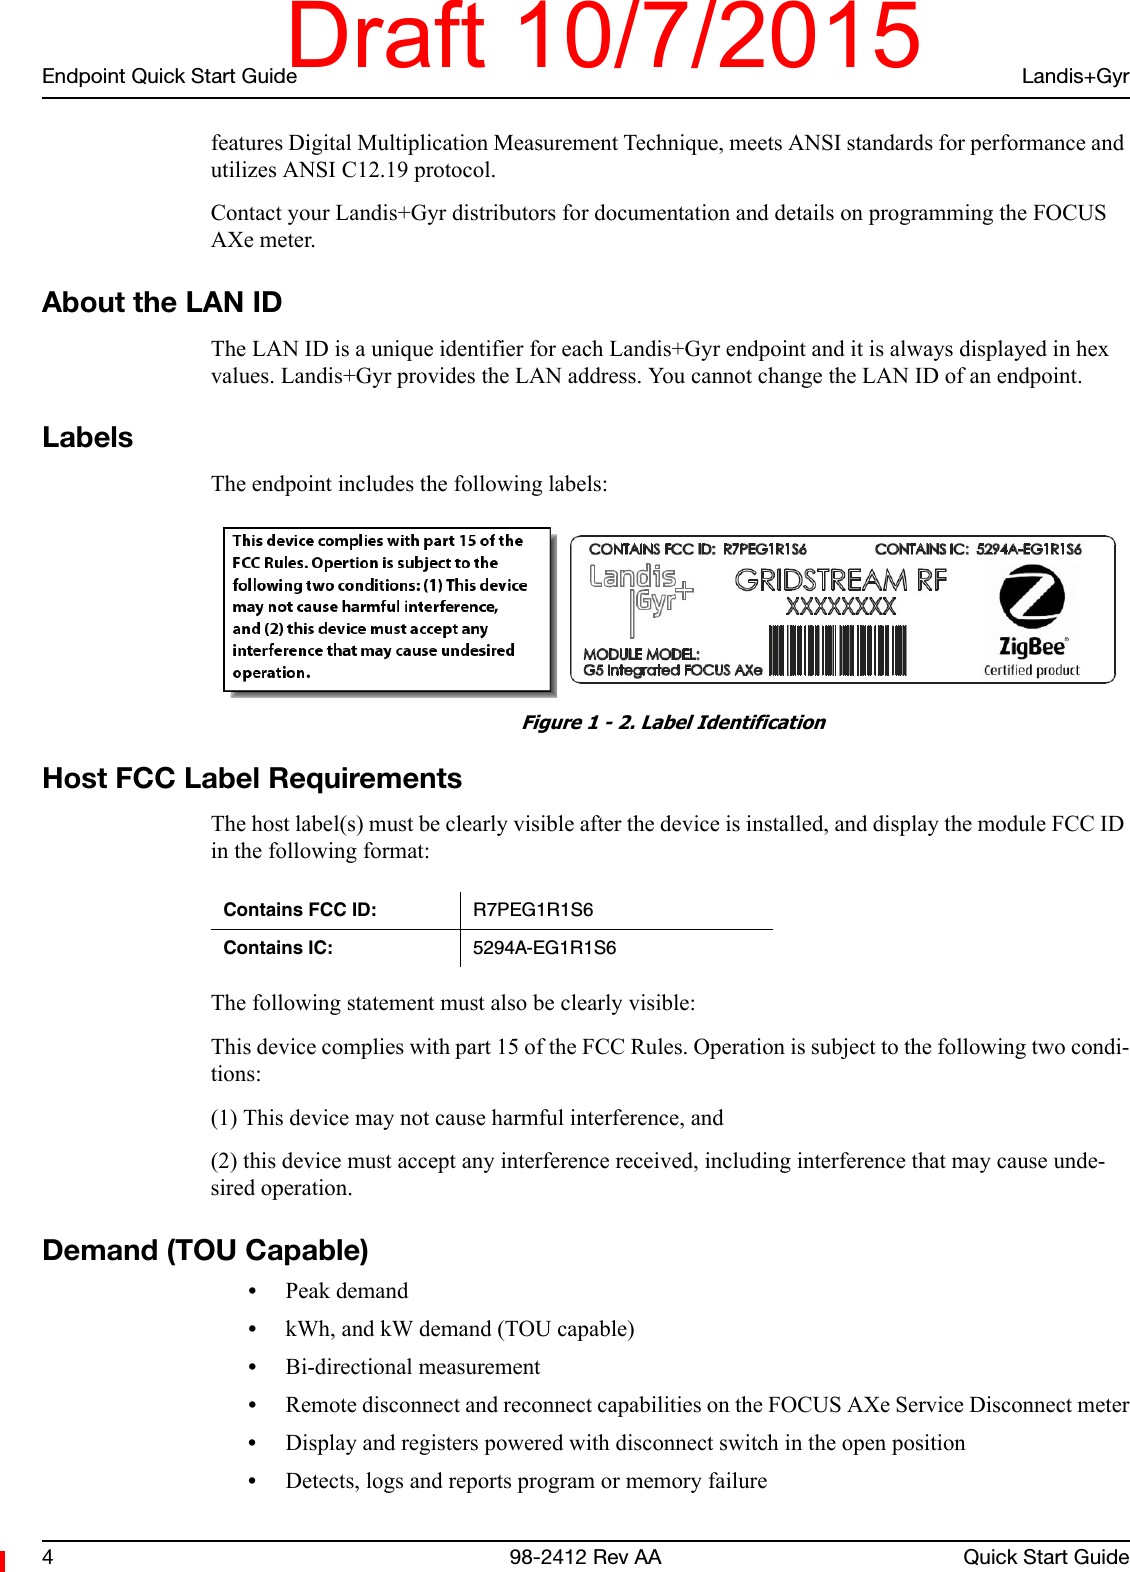 Endpoint Quick Start Guide Landis+Gyr4 98-2412 Rev AA Quick Start Guidefeatures Digital Multiplication Measurement Technique, meets ANSI standards for performance and utilizes ANSI C12.19 protocol.Contact your Landis+Gyr distributors for documentation and details on programming the FOCUS AXe meter.About the LAN IDThe LAN ID is a unique identifier for each Landis+Gyr endpoint and it is always displayed in hex values. Landis+Gyr provides the LAN address. You cannot change the LAN ID of an endpoint.LabelsThe endpoint includes the following labels: Figure 1 - 2. Label IdentificationHost FCC Label RequirementsThe host label(s) must be clearly visible after the device is installed, and display the module FCC ID in the following format:The following statement must also be clearly visible:This device complies with part 15 of the FCC Rules. Operation is subject to the following two condi-tions:(1) This device may not cause harmful interference, and(2) this device must accept any interference received, including interference that may cause unde-sired operation.Demand (TOU Capable)•Peak demand•kWh, and kW demand (TOU capable)•Bi-directional measurement•Remote disconnect and reconnect capabilities on the FOCUS AXe Service Disconnect meter•Display and registers powered with disconnect switch in the open position•Detects, logs and reports program or memory failureContains FCC ID: R7PEG1R1S6Contains IC: 5294A-EG1R1S6Draft 10/7/2015